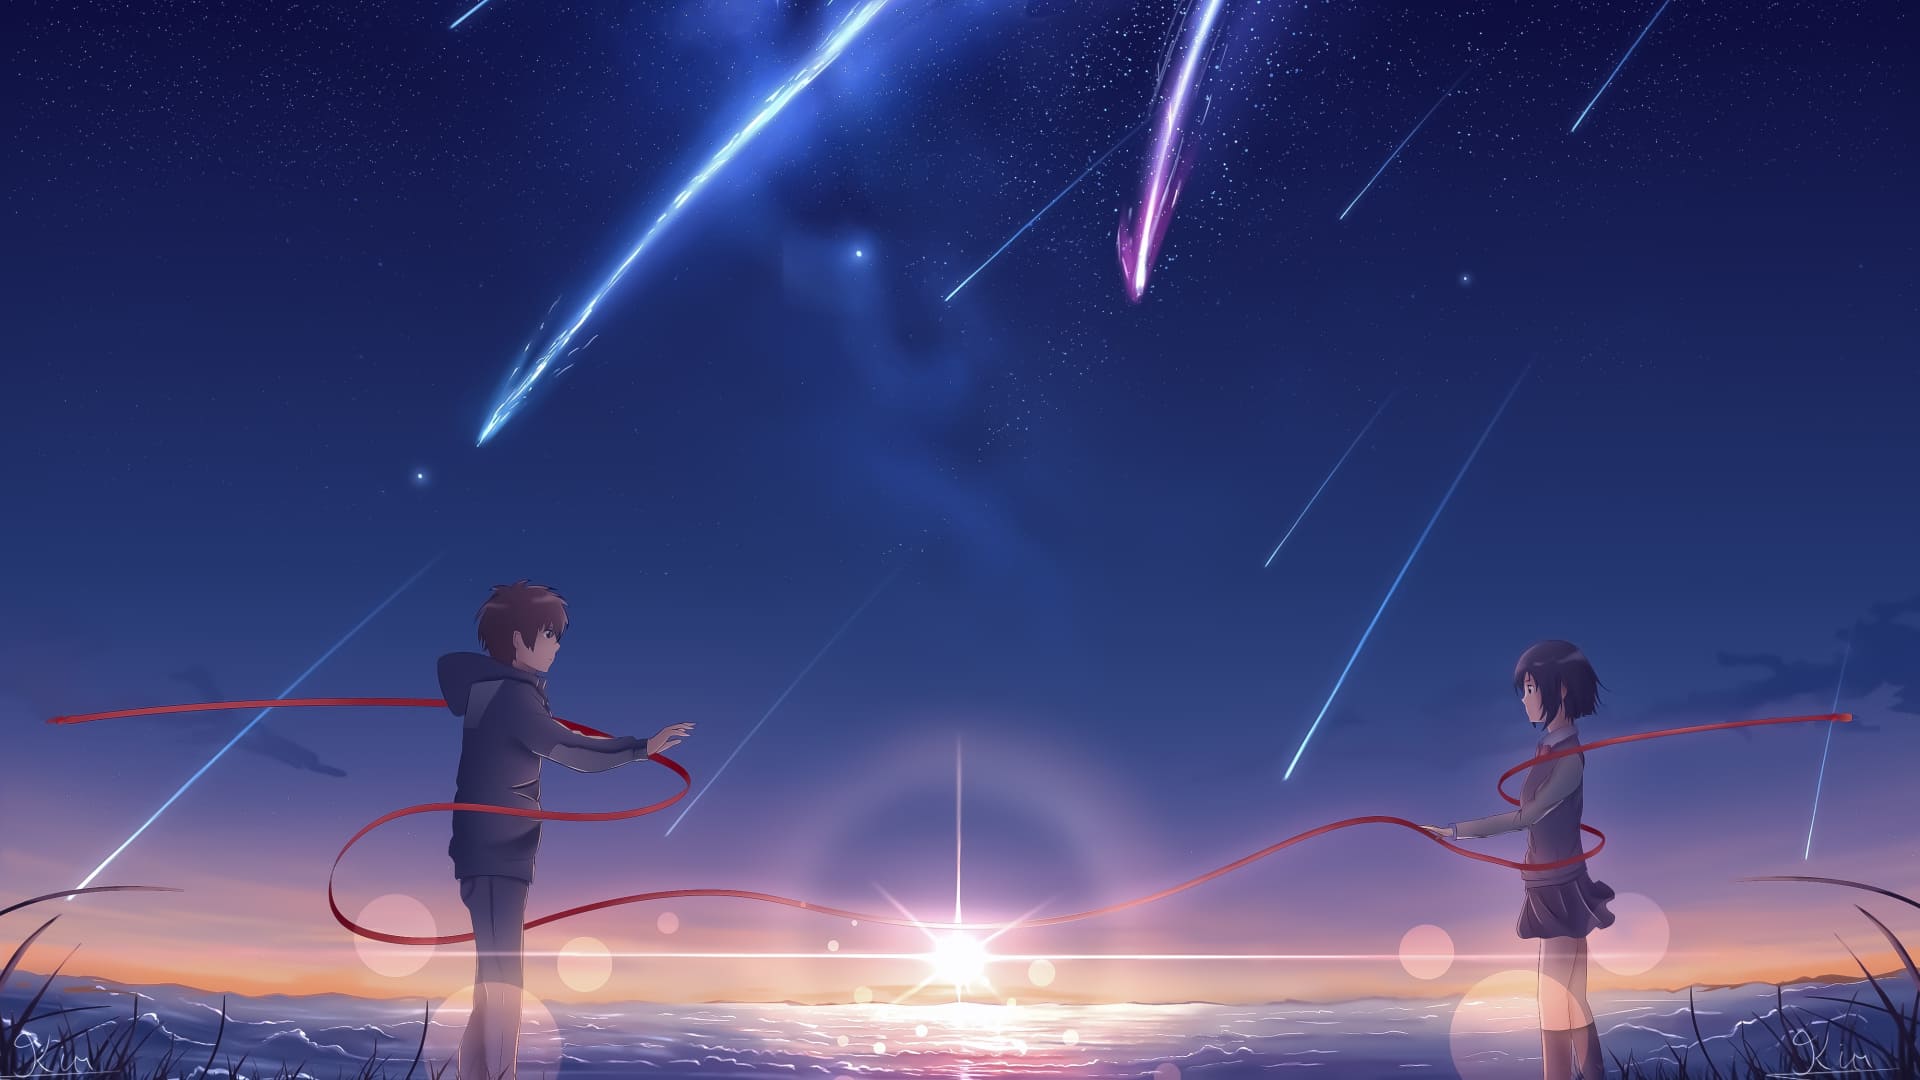 Your Name Wallpapers and Backgrounds 4K HD Dual Screen